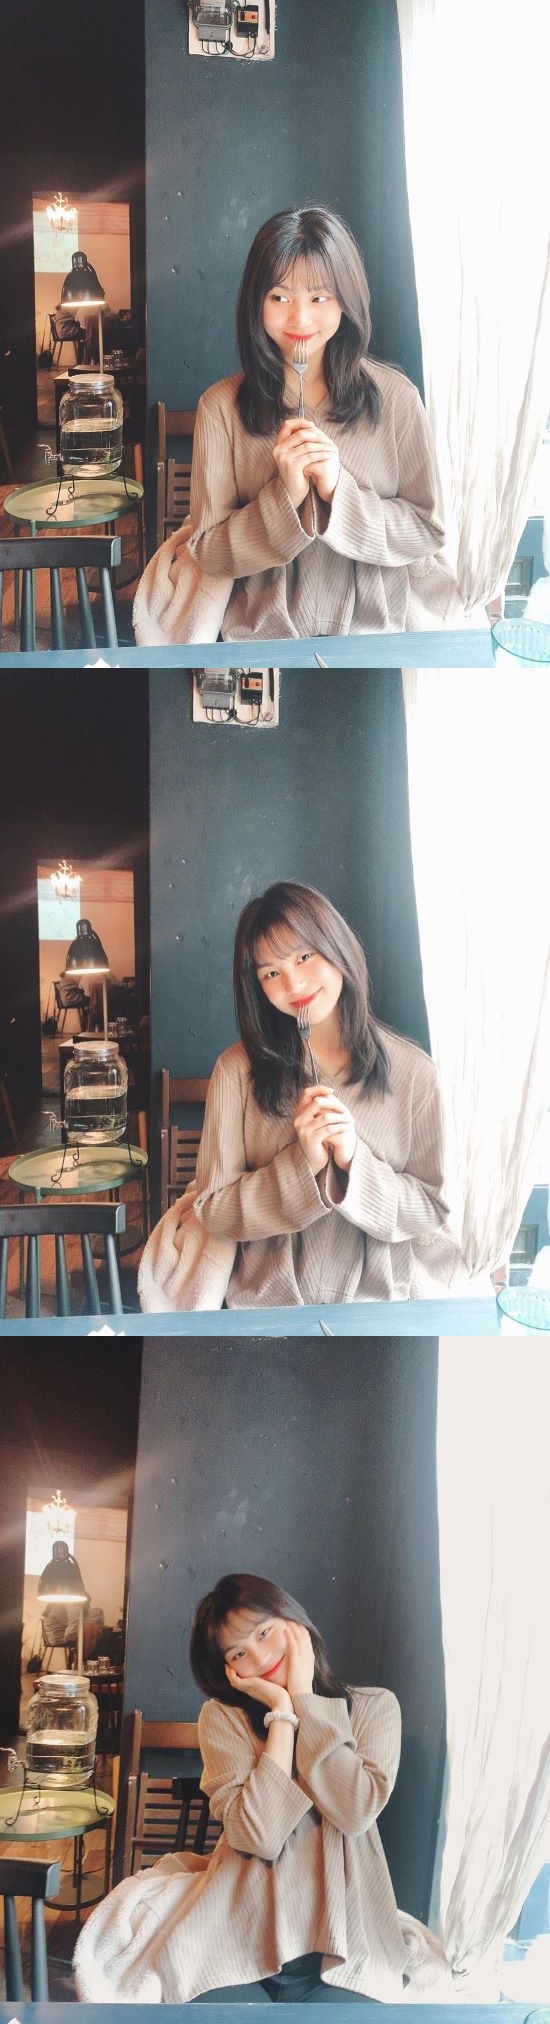 Group GFriend member Umji boasted a pure beauty.On the 16th, Umji posted several photos through the GFriend official Instagram.The photo shows Umji visiting a restaurant, who smiled with a fork and snipped at Southern with a cute calyx pose.GFriend, to which Umji belongs, acted as a crossroad.Photo: GFriend Official Instagram